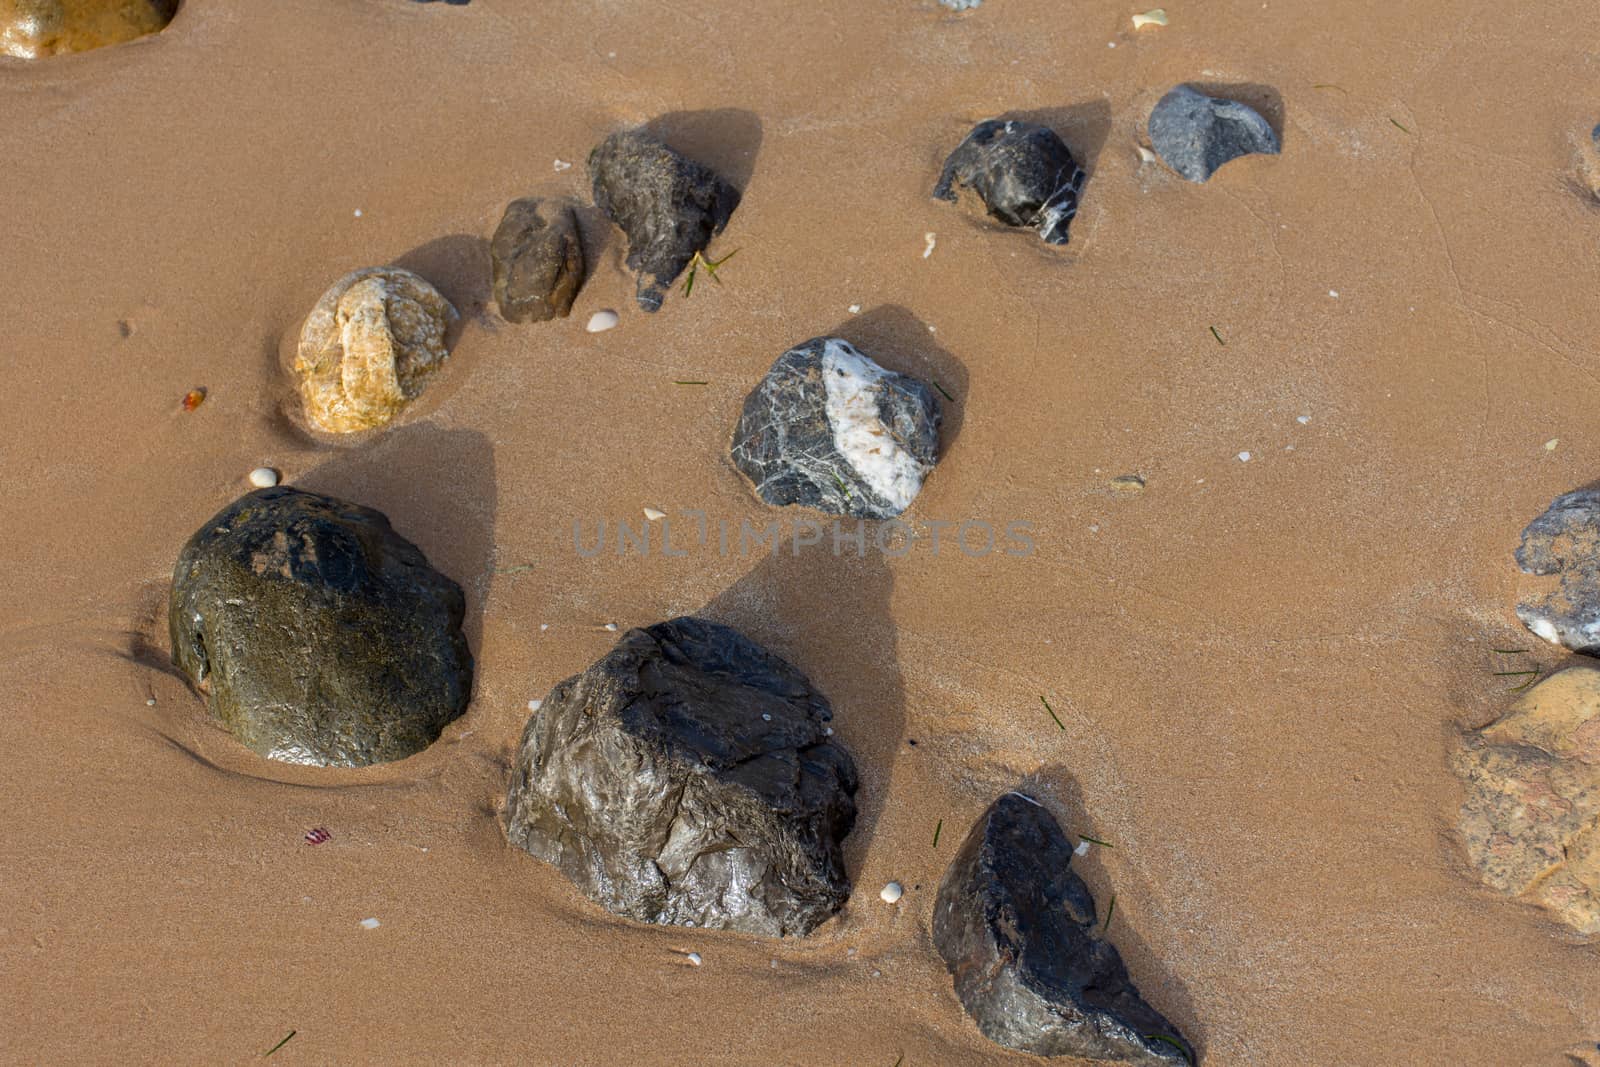 Rocks on the beach seashore in the sand and water. Quiet, peaceful concept.